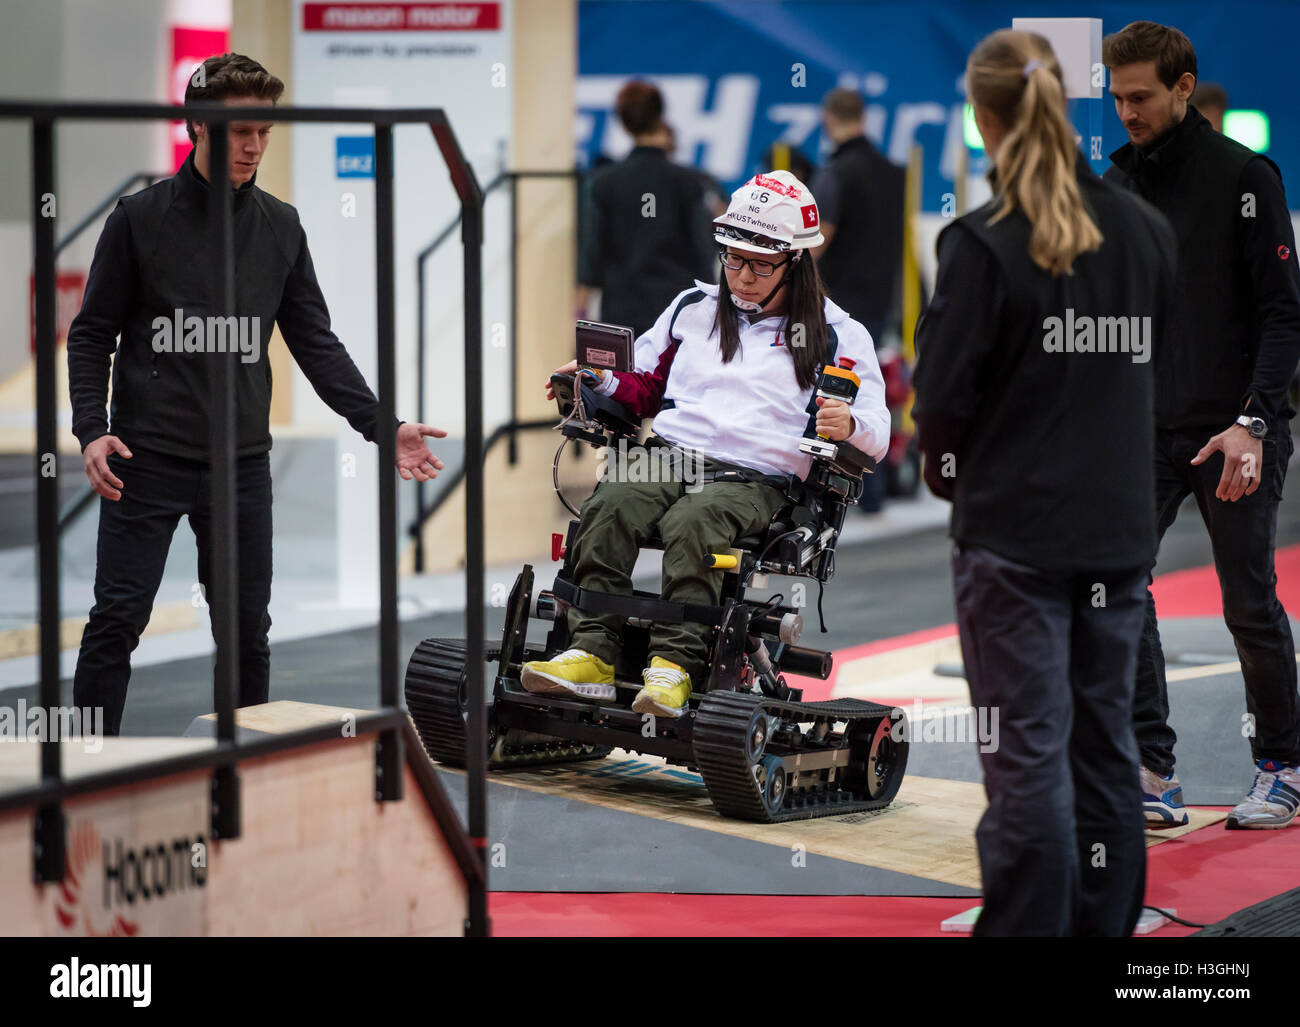 Kloten, Switzerland. 8th Oct, 2016. Cho Yu NG (CHN) passes a wheelchair obstacle course at Cybathlon, the first championship for racing pilots with disabilities using bionic devices at the Swiss Arena in Kloten (Zurich), Switzerland. Organized by the Swiss Federal Institute of Technology (ETH) in Zurich, Cybathlon brings together interdisciplinary teams of bio-engineers, scientists and athletes with physical disabilities to compete in solving everyday tasks and to demonstrate how technology enables them to overcome physical limitations of their body. Credit:  Erik Tham/Alamy Live News Stock Photo